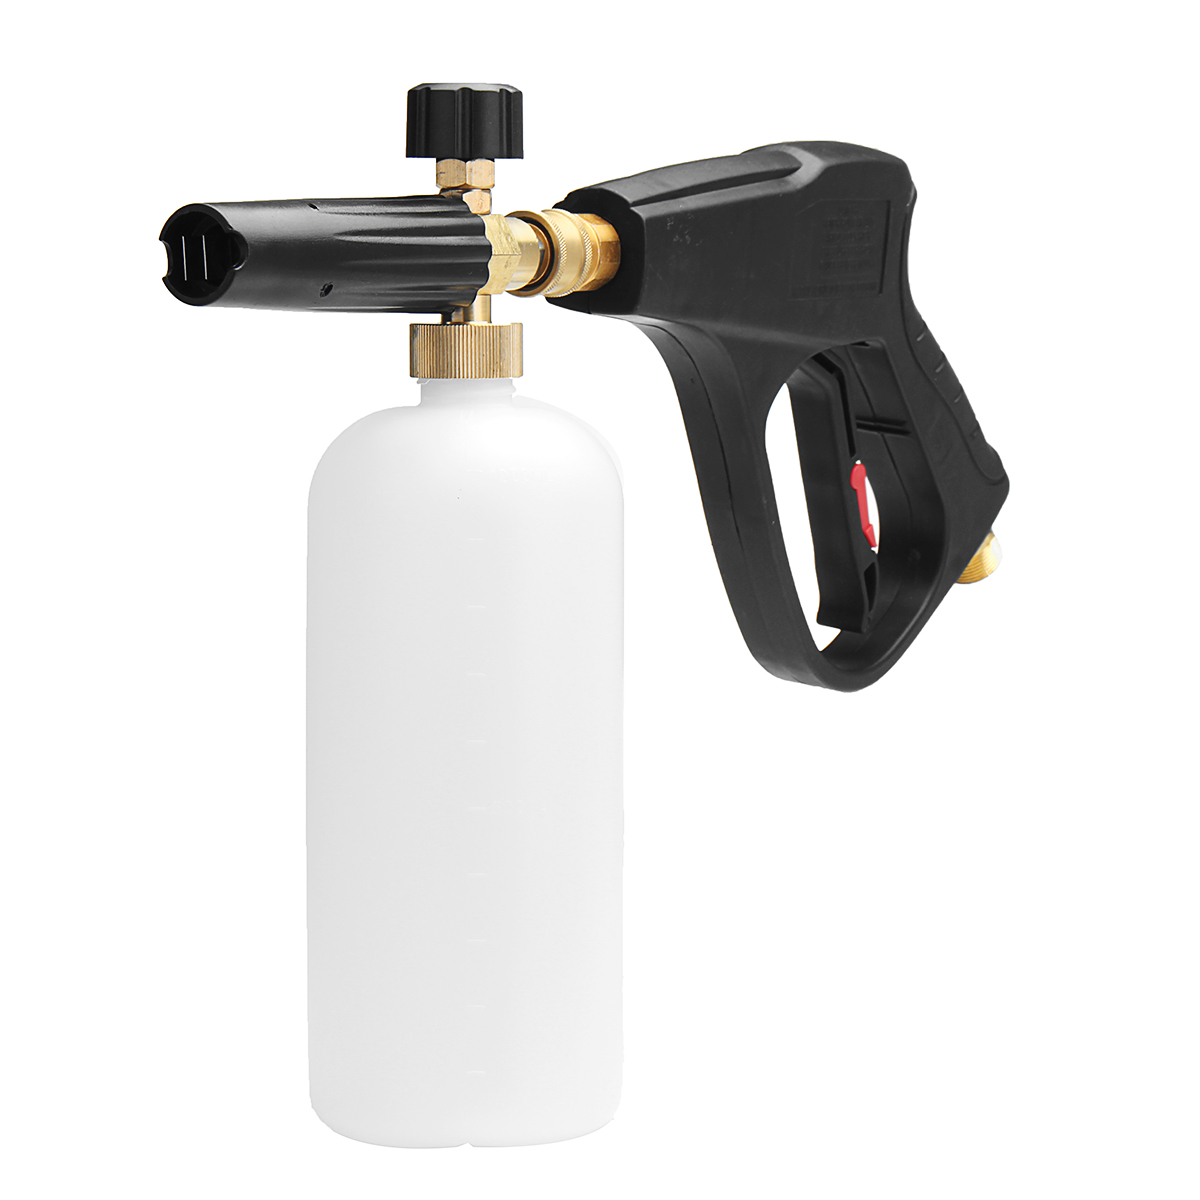 High-Pressure-Washer-Jet-14quot-Snow-Foam-Lance-Cannon-Car-Clean-Washer-Bottle-1374822-6